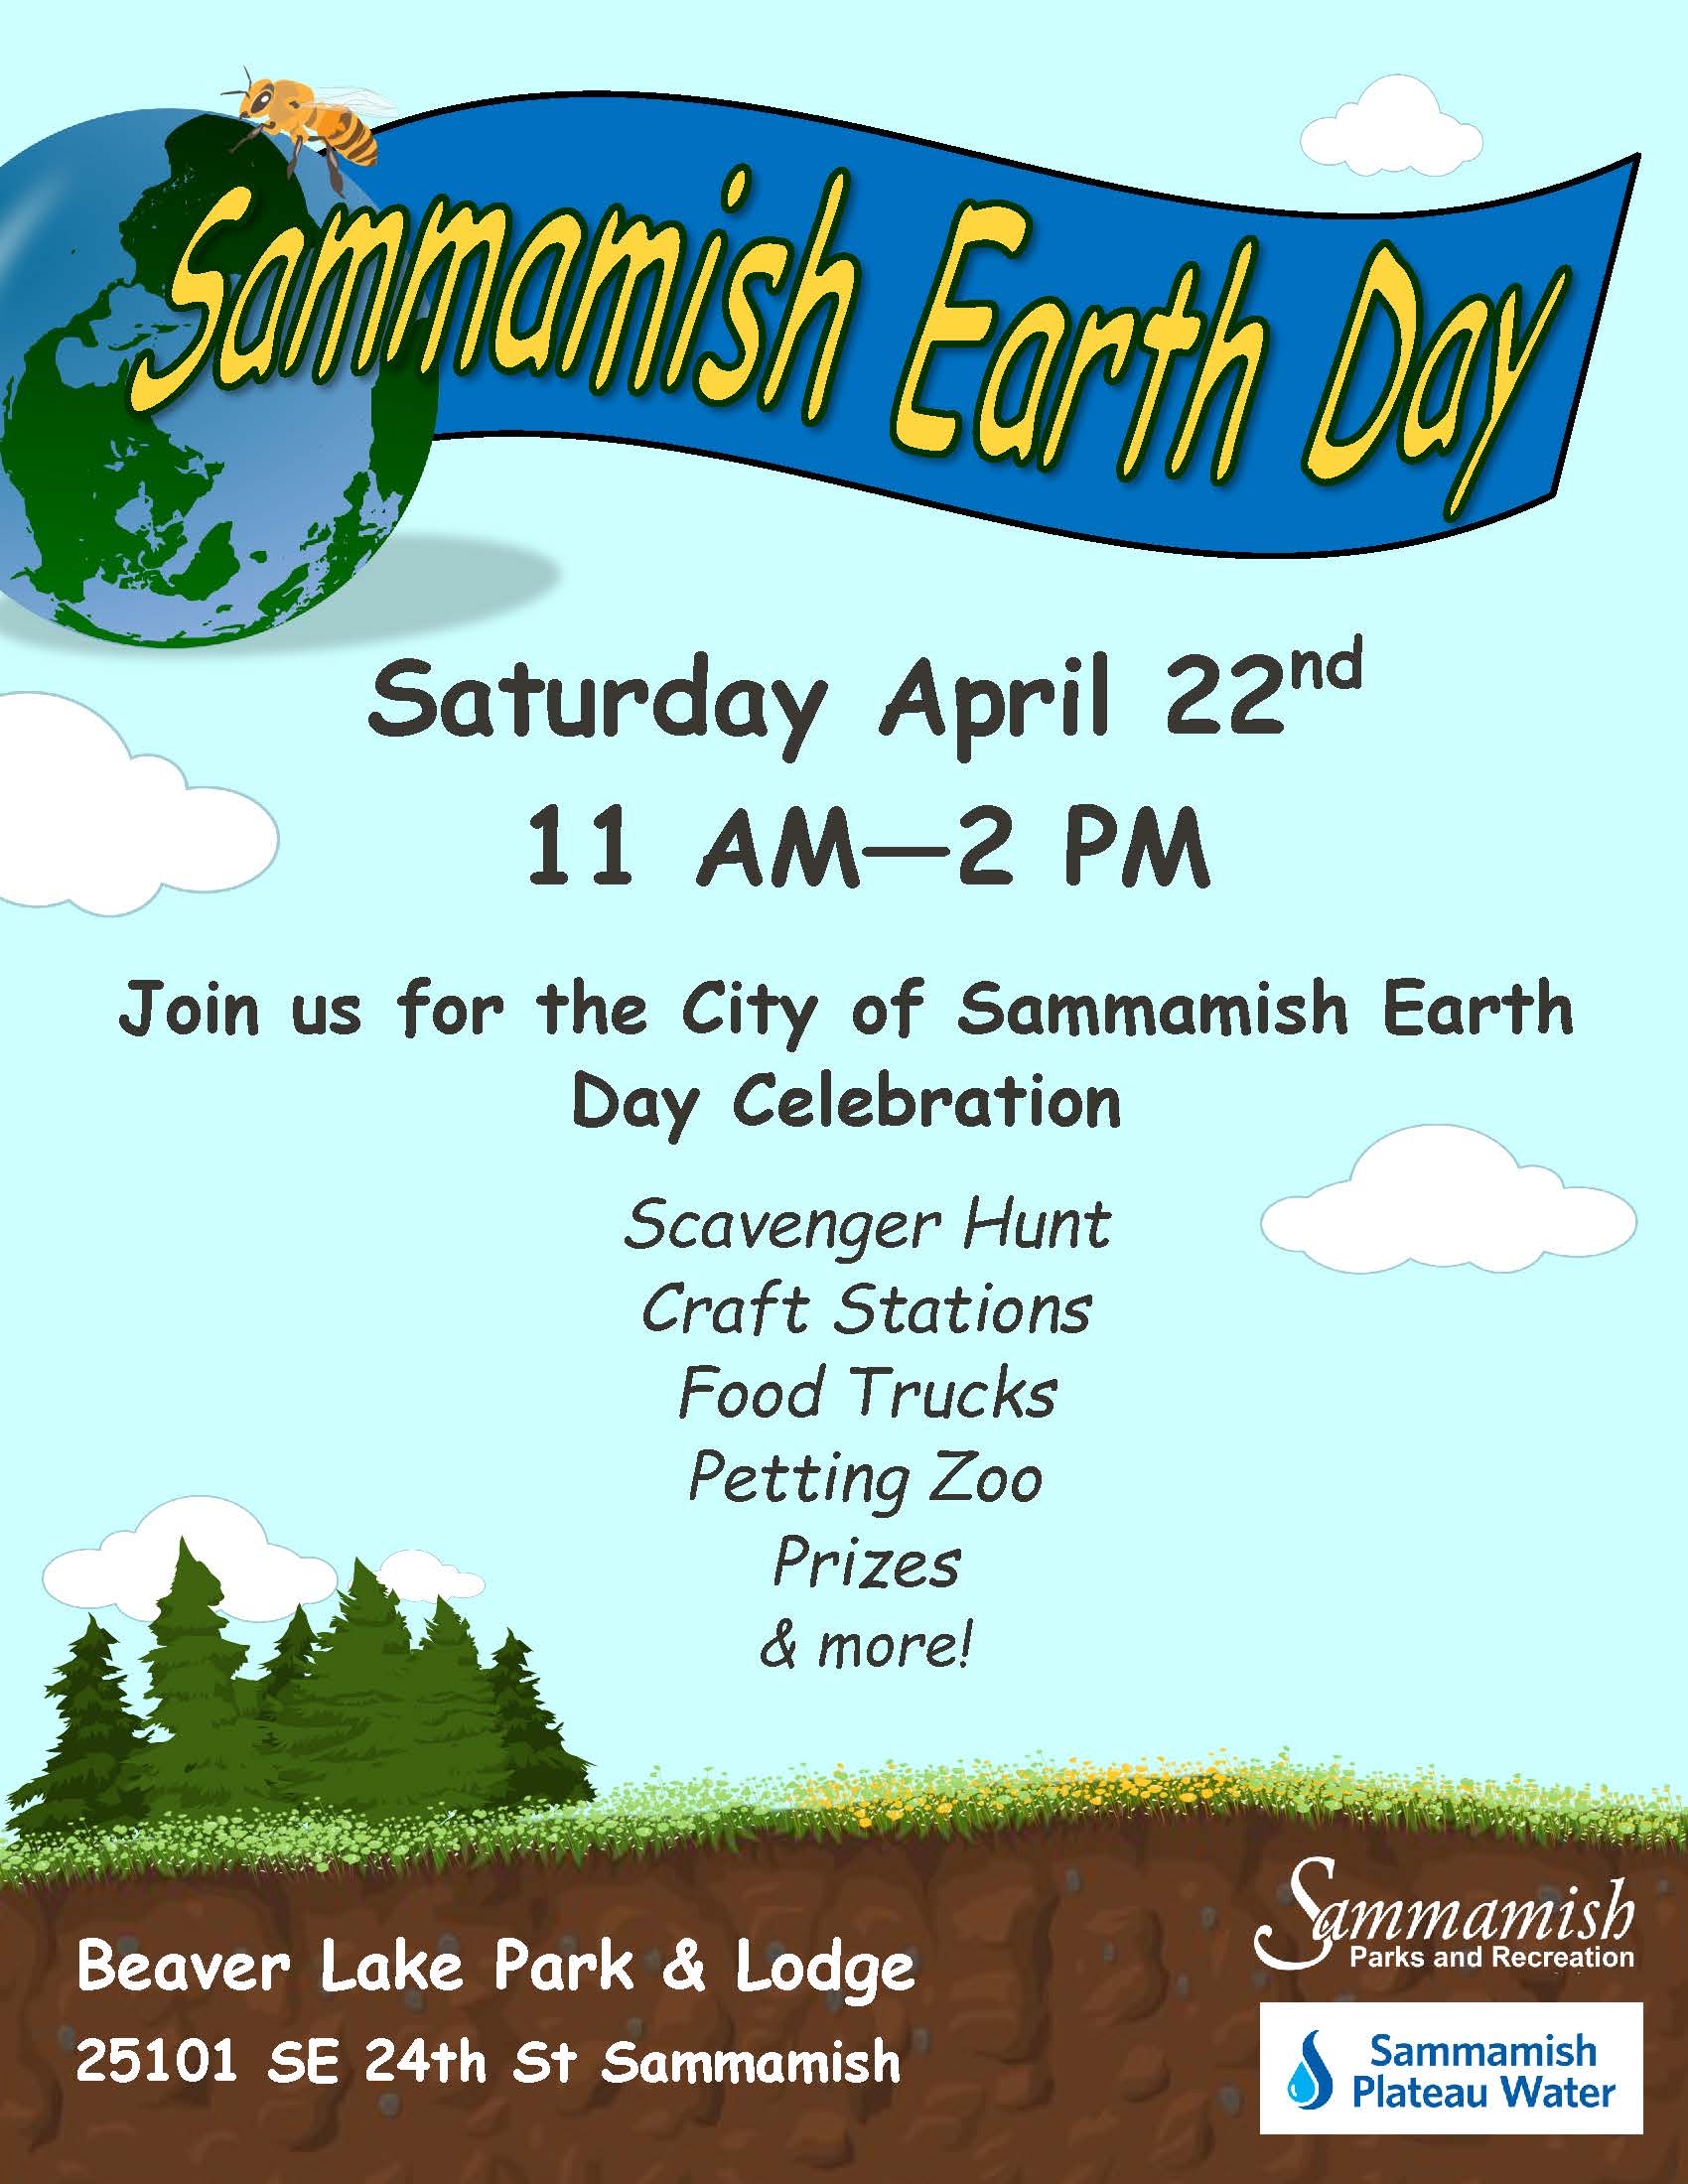 Illustrated meadow with evergreen trees on the left side. Clouds in the blue sky with the earth in the upper left corner. Blue banner at the top says Sammamish Earth Day in yellow letters. The remainder of the flyer says: Saturday, April 22. 11 AM – 2 PM. Join us for the City of Sammamish Earth Day Celebration. Scavenger hunt, craft stations, food trucks, petting zoo, prizes, and more. Beaver Lake Park and Lodge. 25101 SE 24th St Sammamish. Sammamish Parks and Recreation. Sammamish Plateau Water